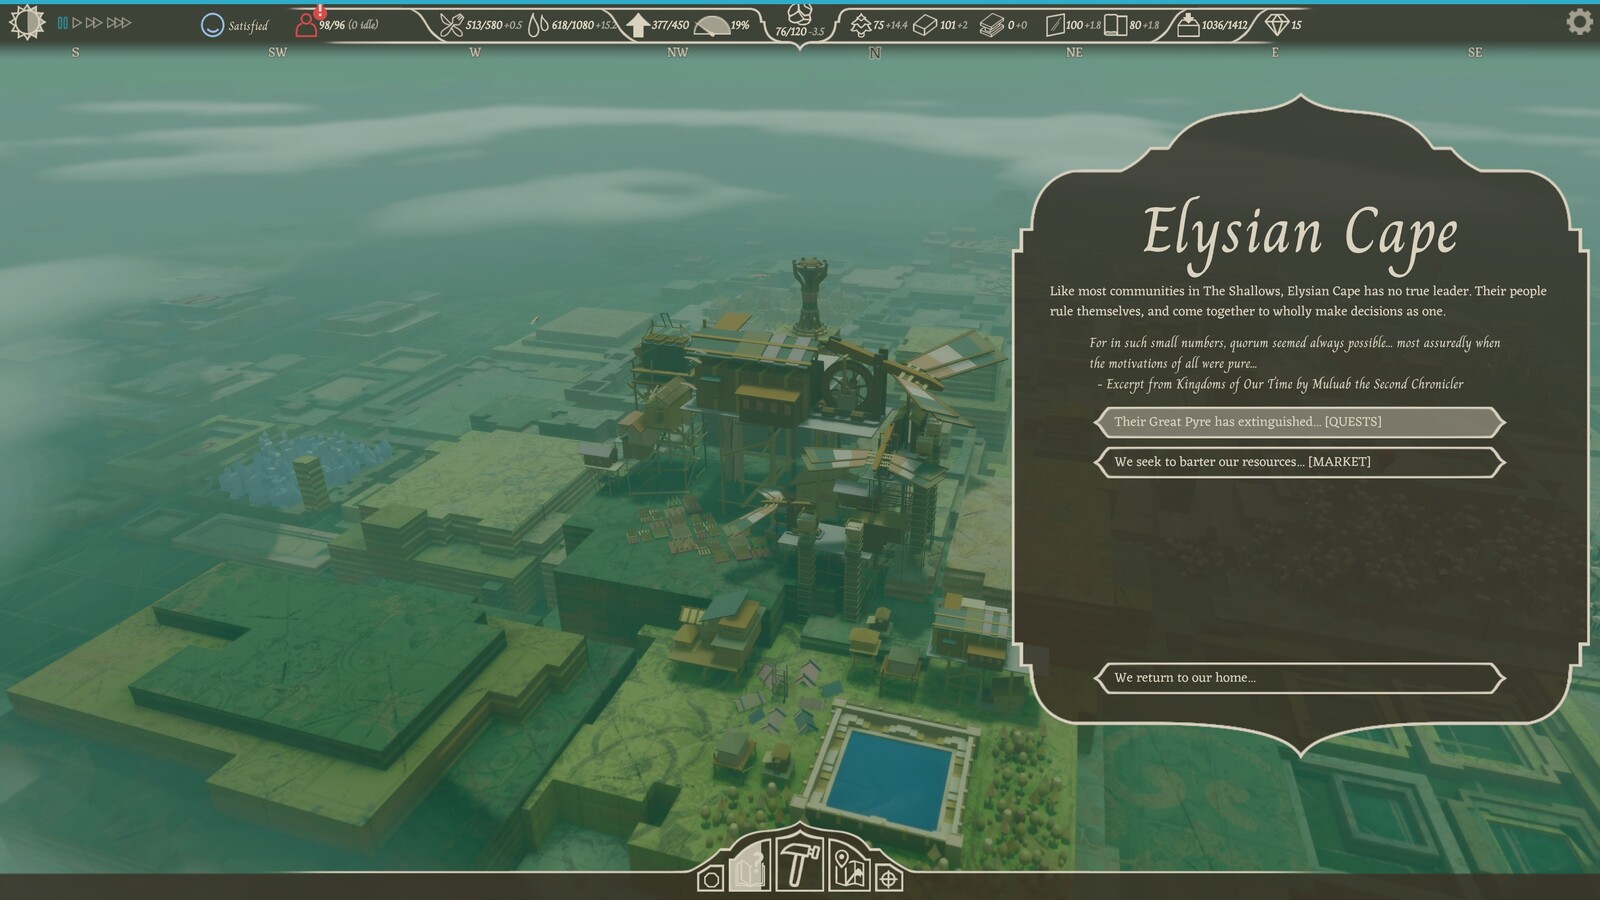 Elysian Cape - Like most communities in The Shallows, Elysian Cape has no true leader. Their people rule themselves, and come together to wholly make decisions as one